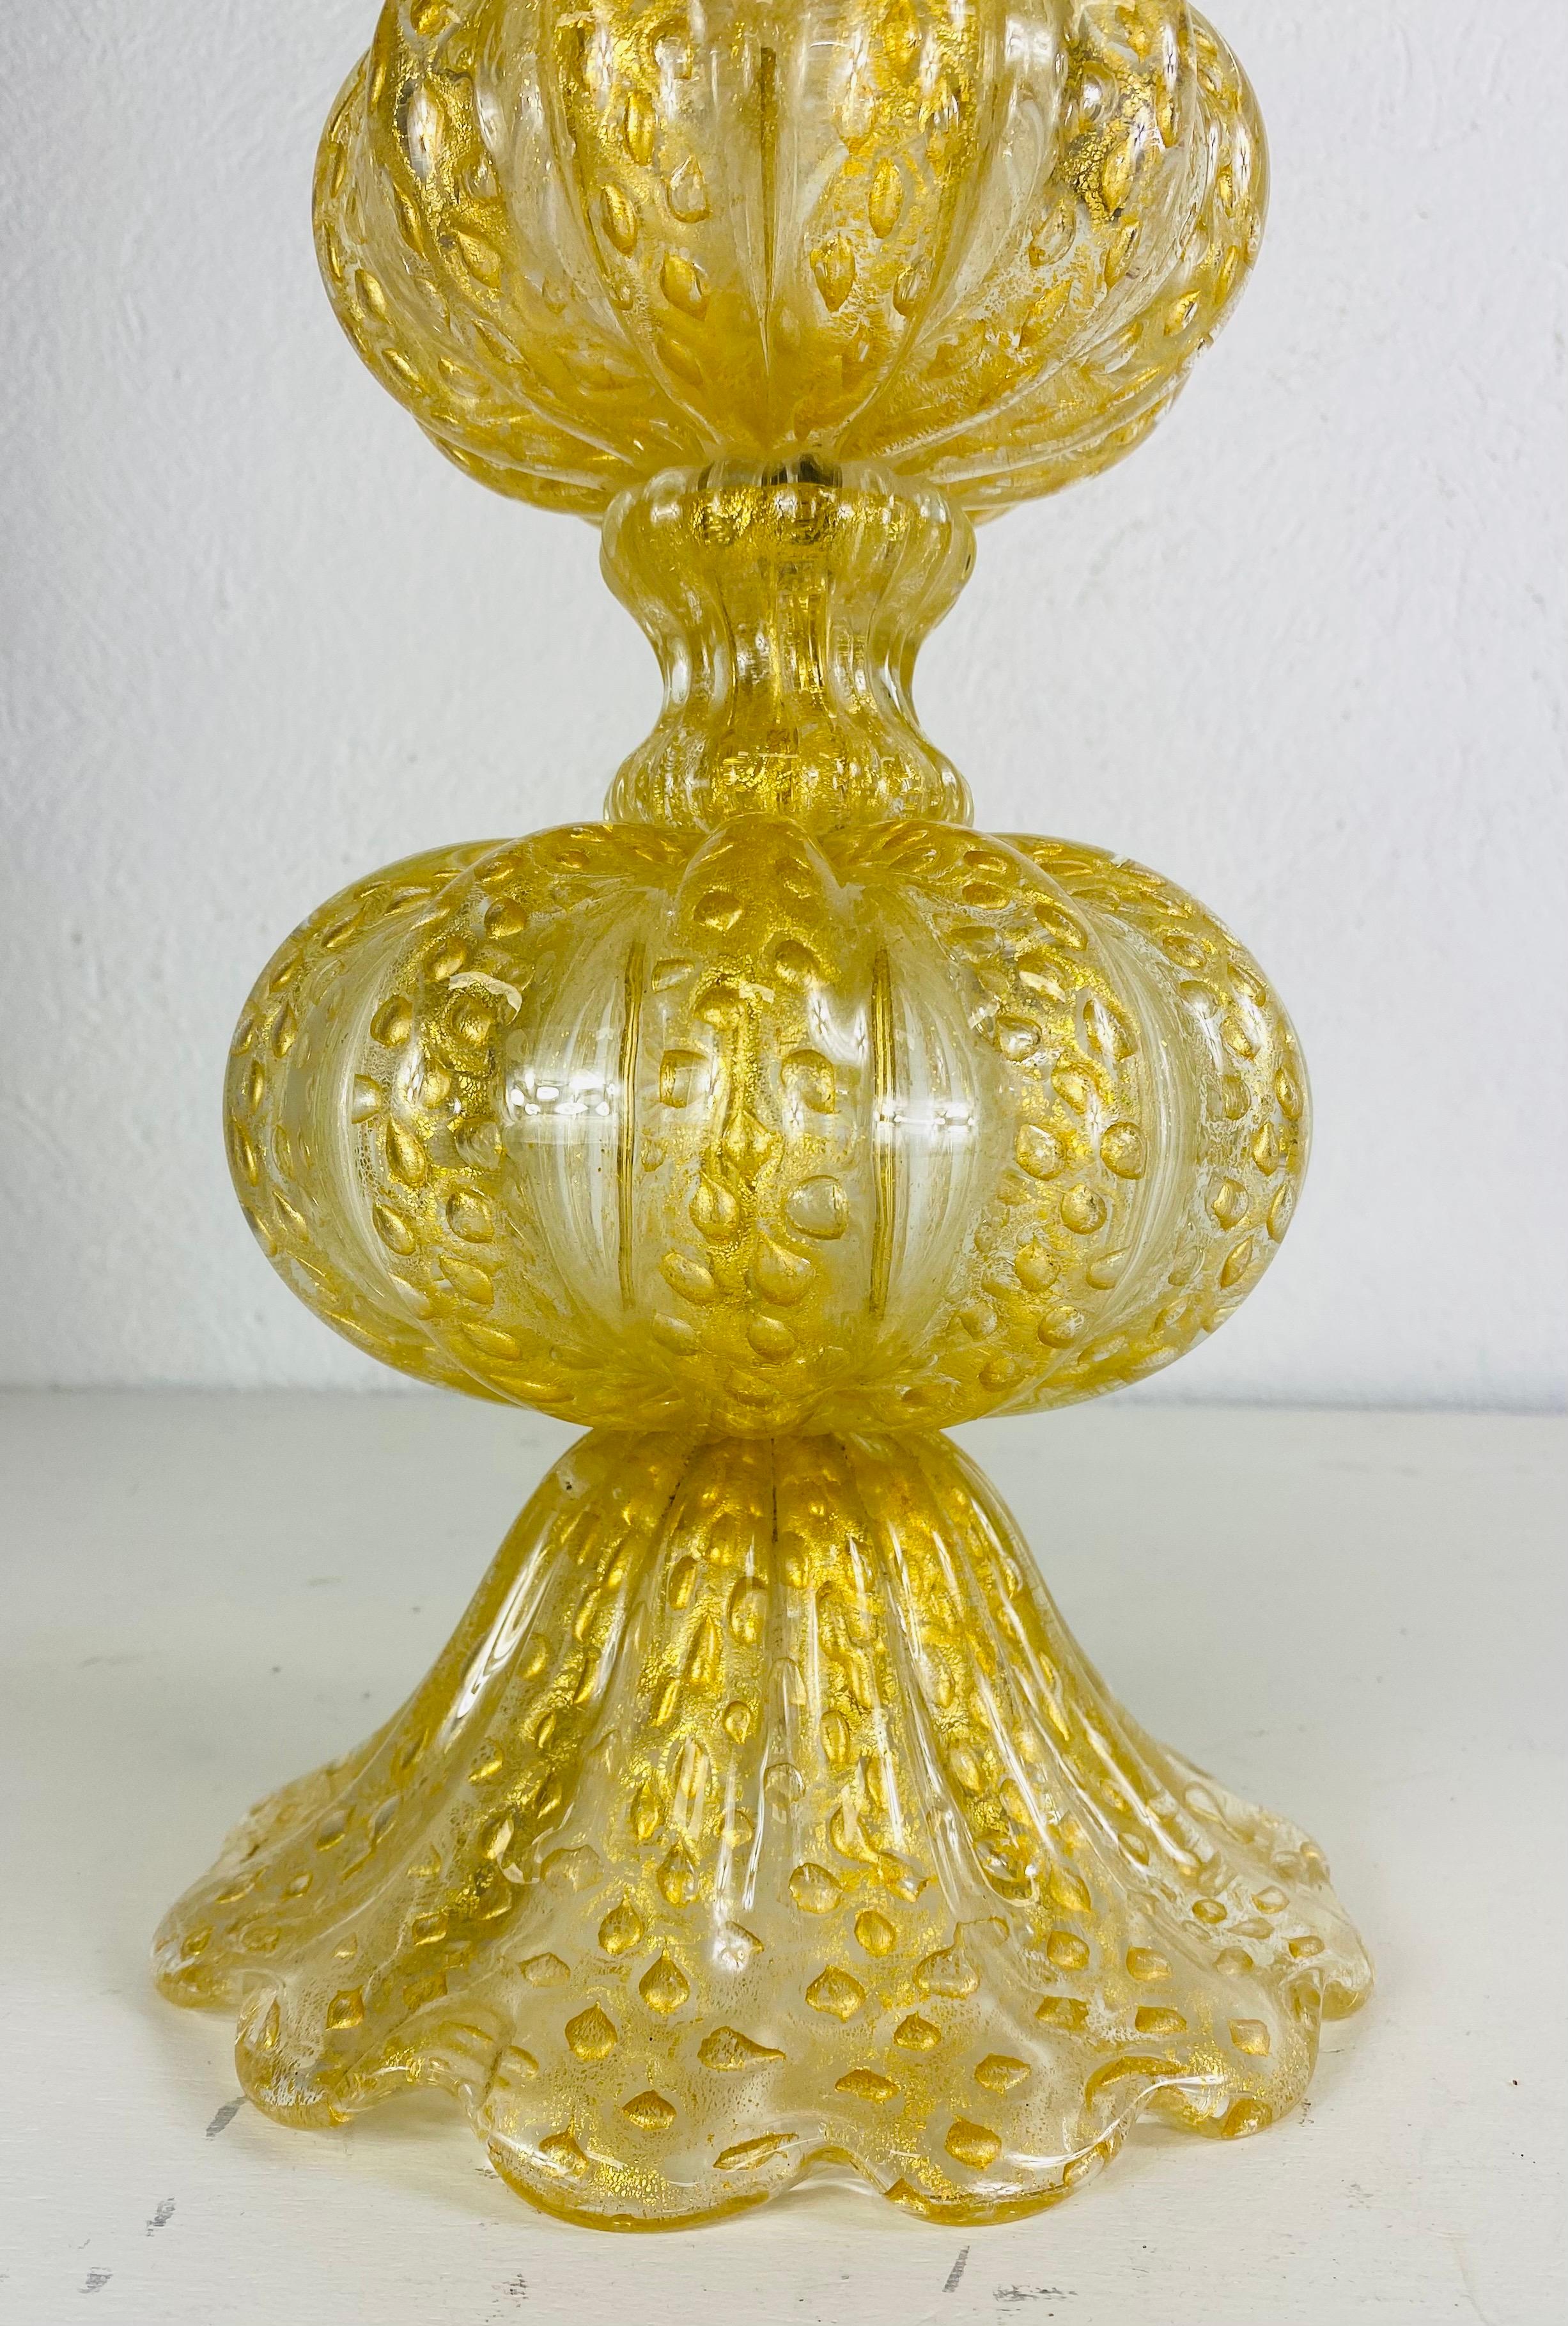 This is a single vintage hand bloom Marano glass table lamp. Produced in the 1950s by Barovier Toso with a single socket and a new linen lampshade. This lamp was handblown to give the effect of raindrop stripping with 22 karat gold flex throughout.